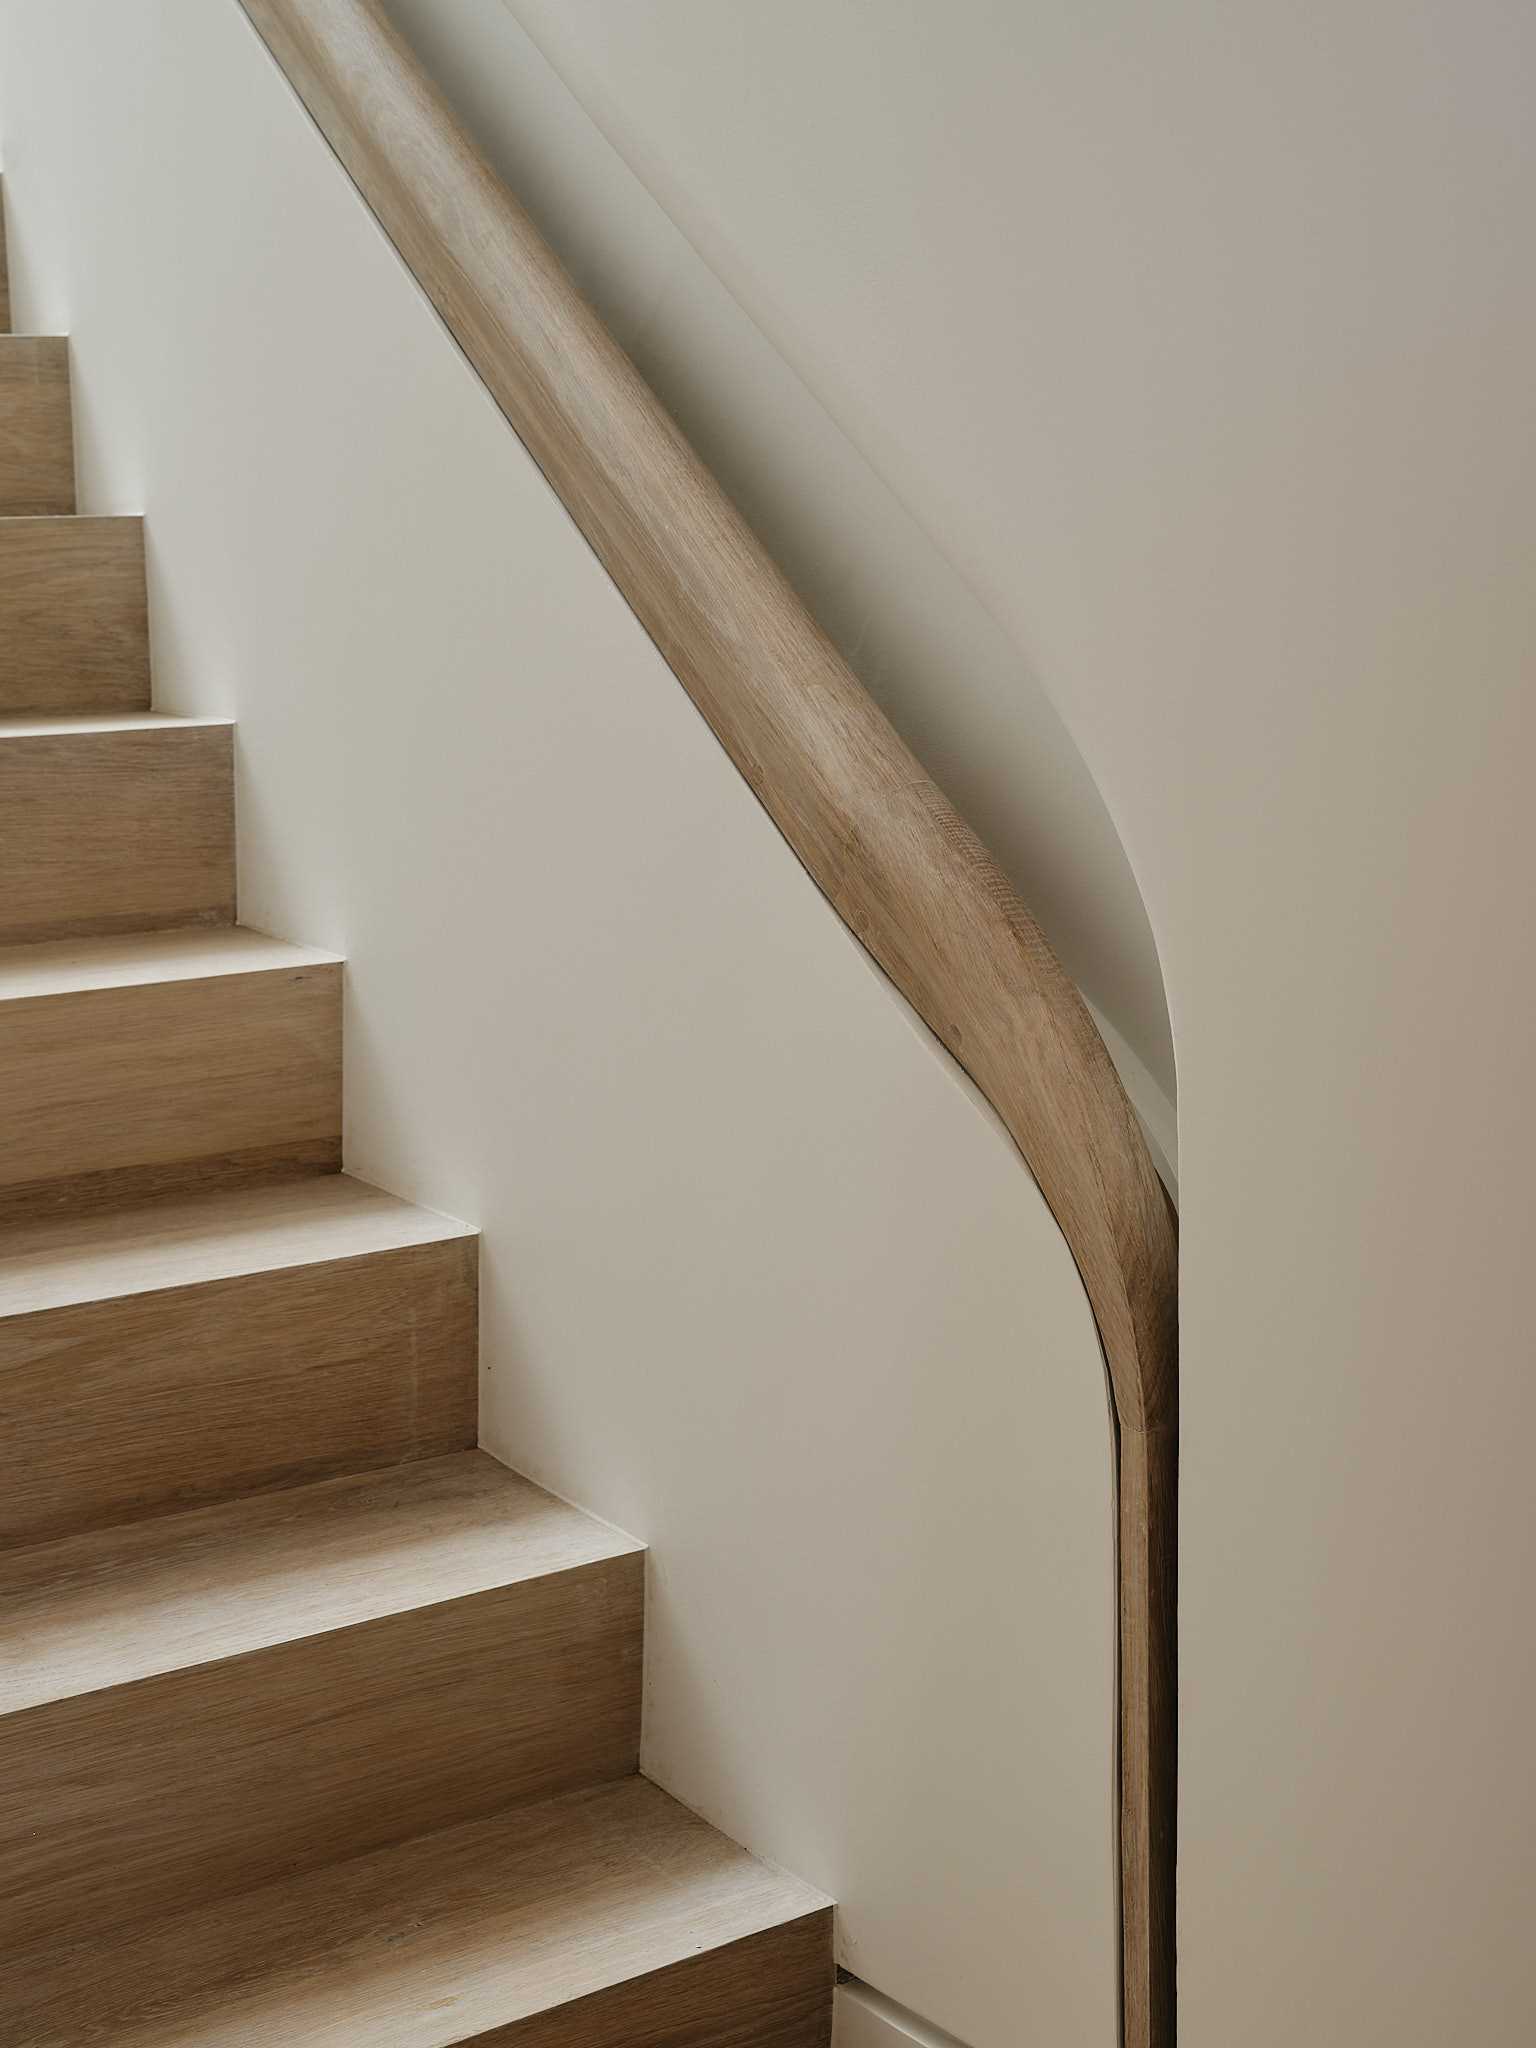 A unique design detail of the interior can be seen on the stairs, with the built-in custom-milled handrail that's recessed into the wall and includes hidden lighting.